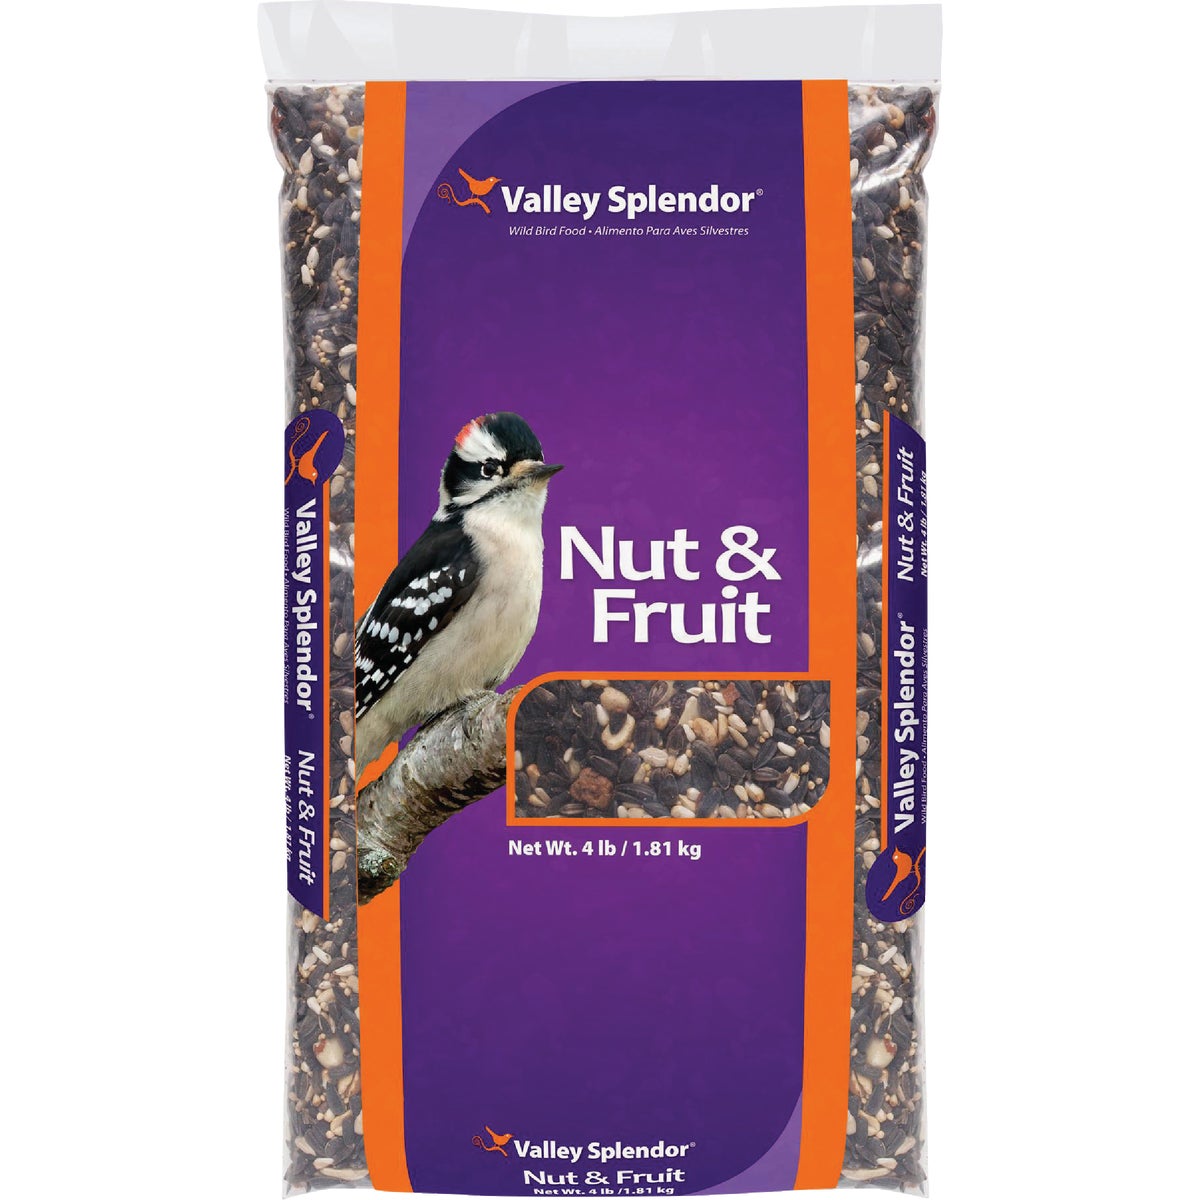 Item 744508, Blend of fruit, nuts, and sunflower seed is all natural with no artificial 